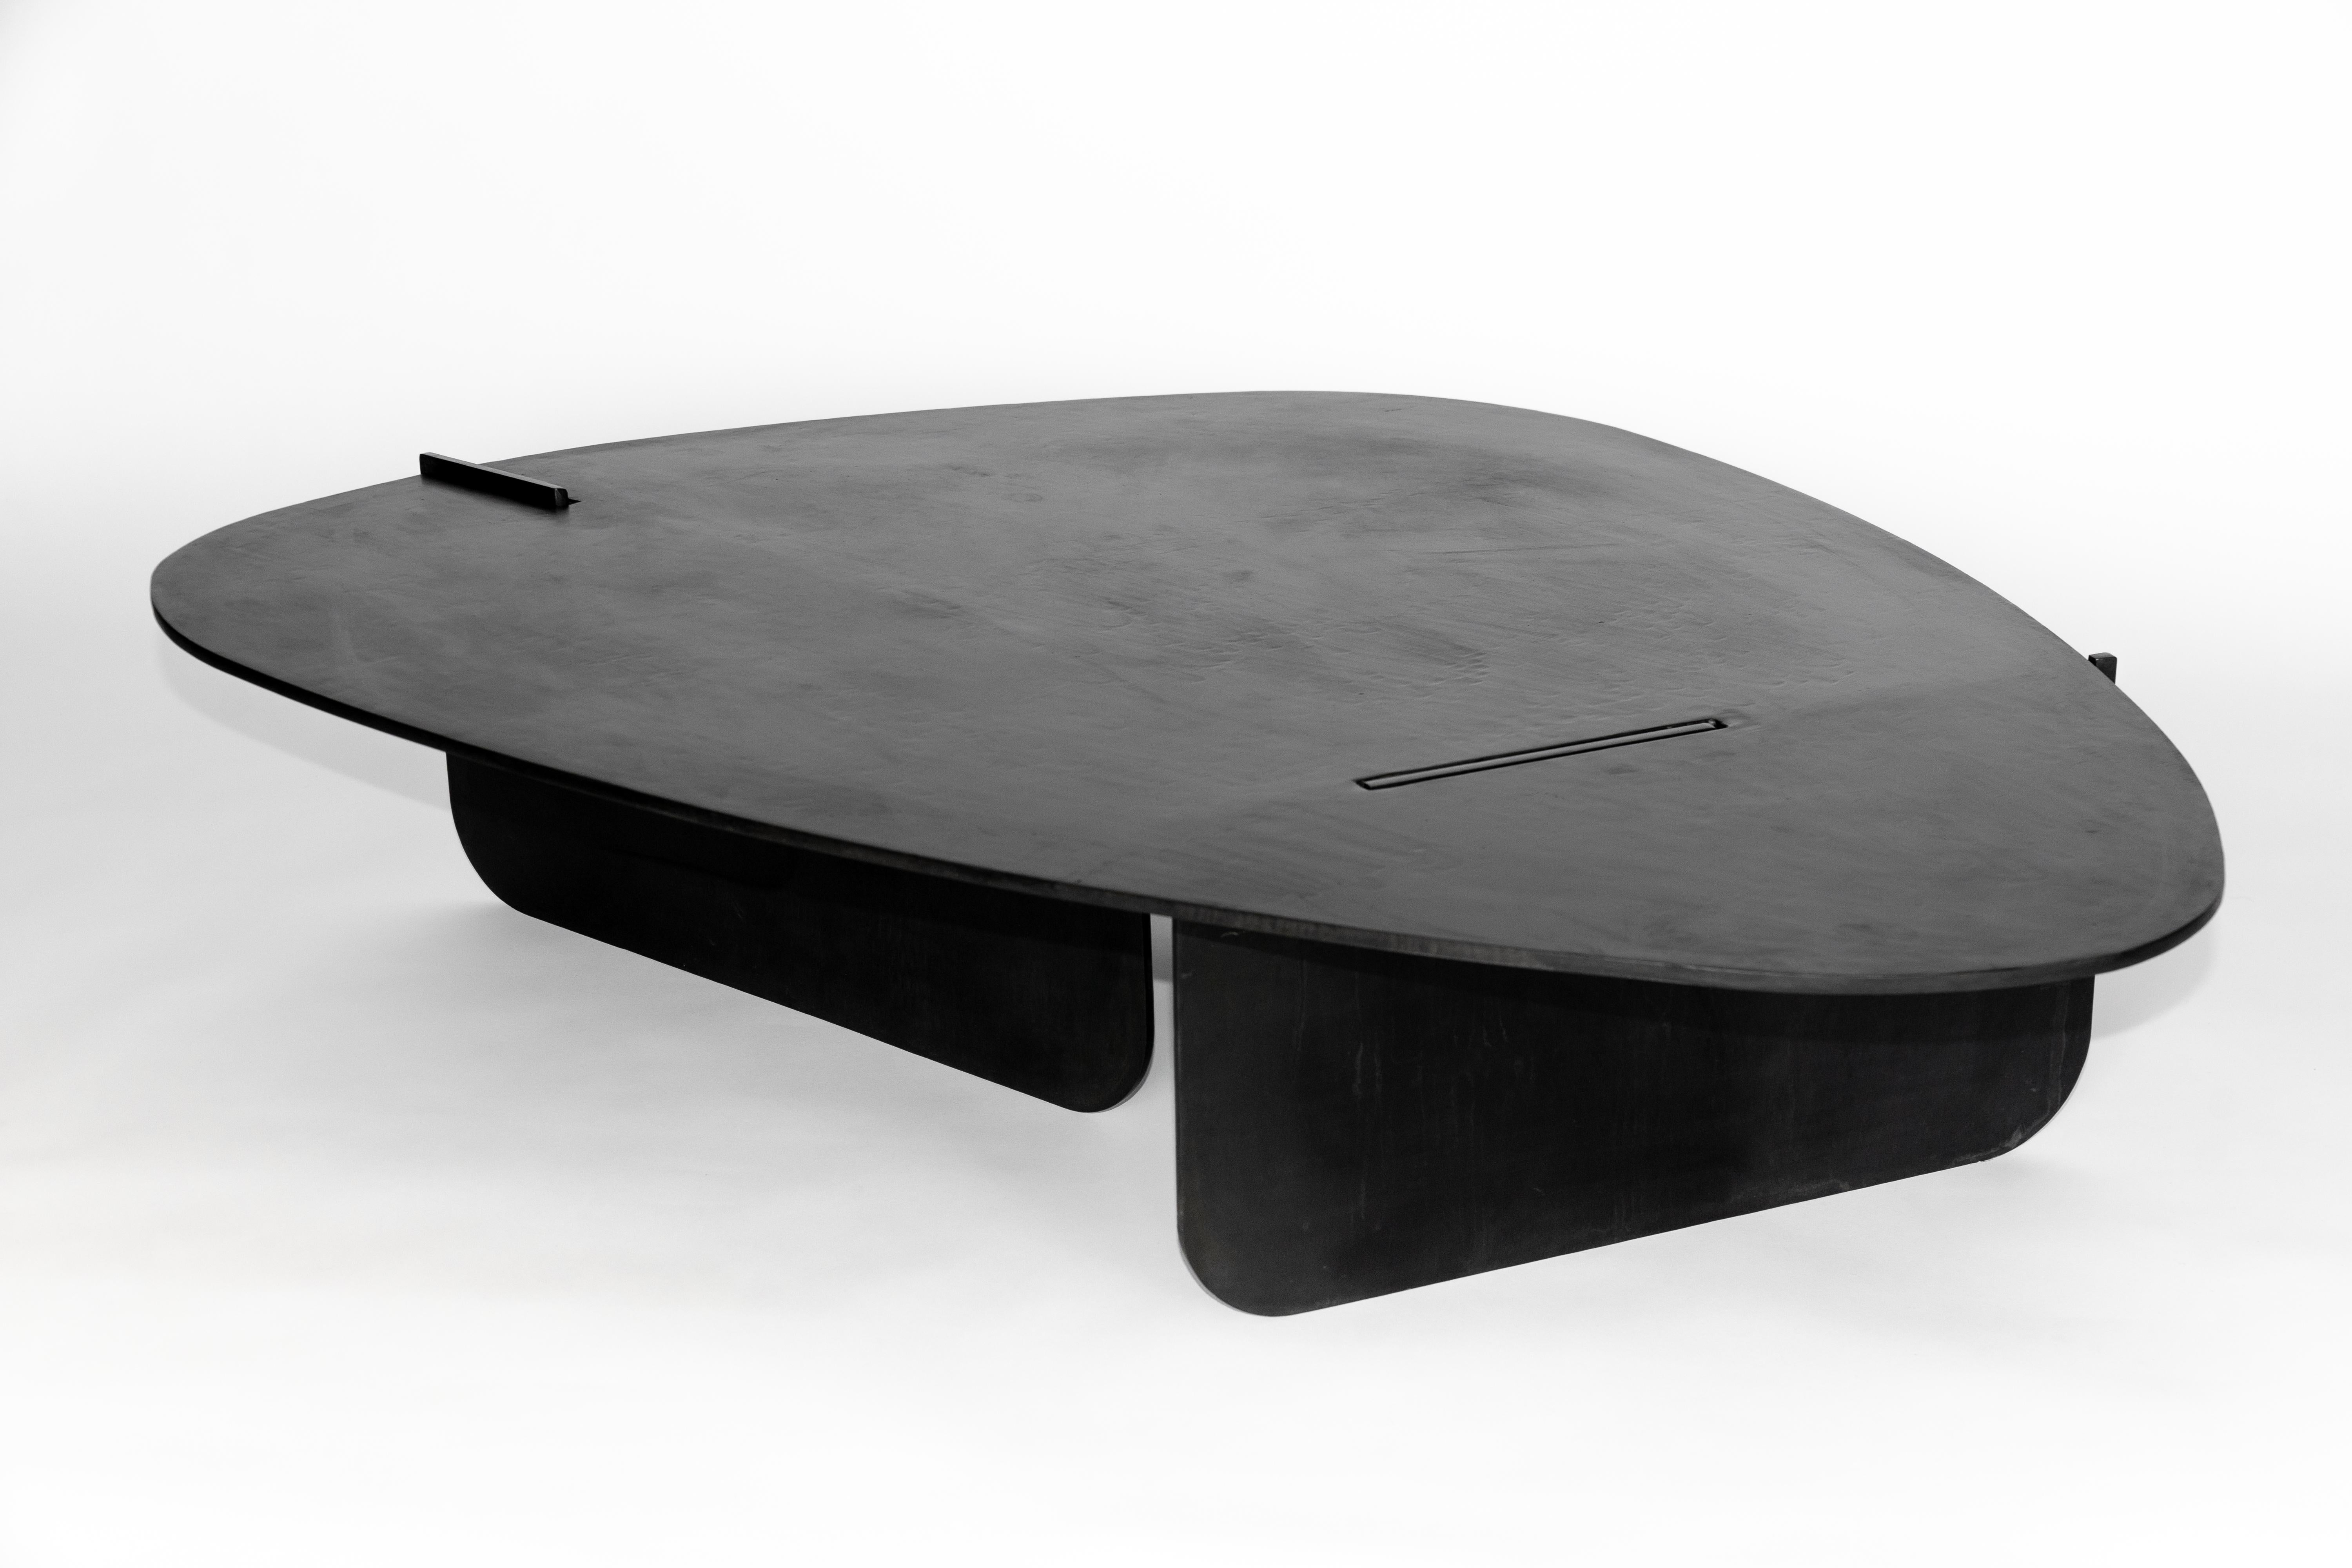 Coffee table No. 15 by JM Szymanski
Dimensions: L 52” x W 36” x H 13” 
Materials: Blackened waxed steel

Jake Szymanski lives and designs in New York city.
His design education began in his early childhood where he grew up in Nepal. He studied